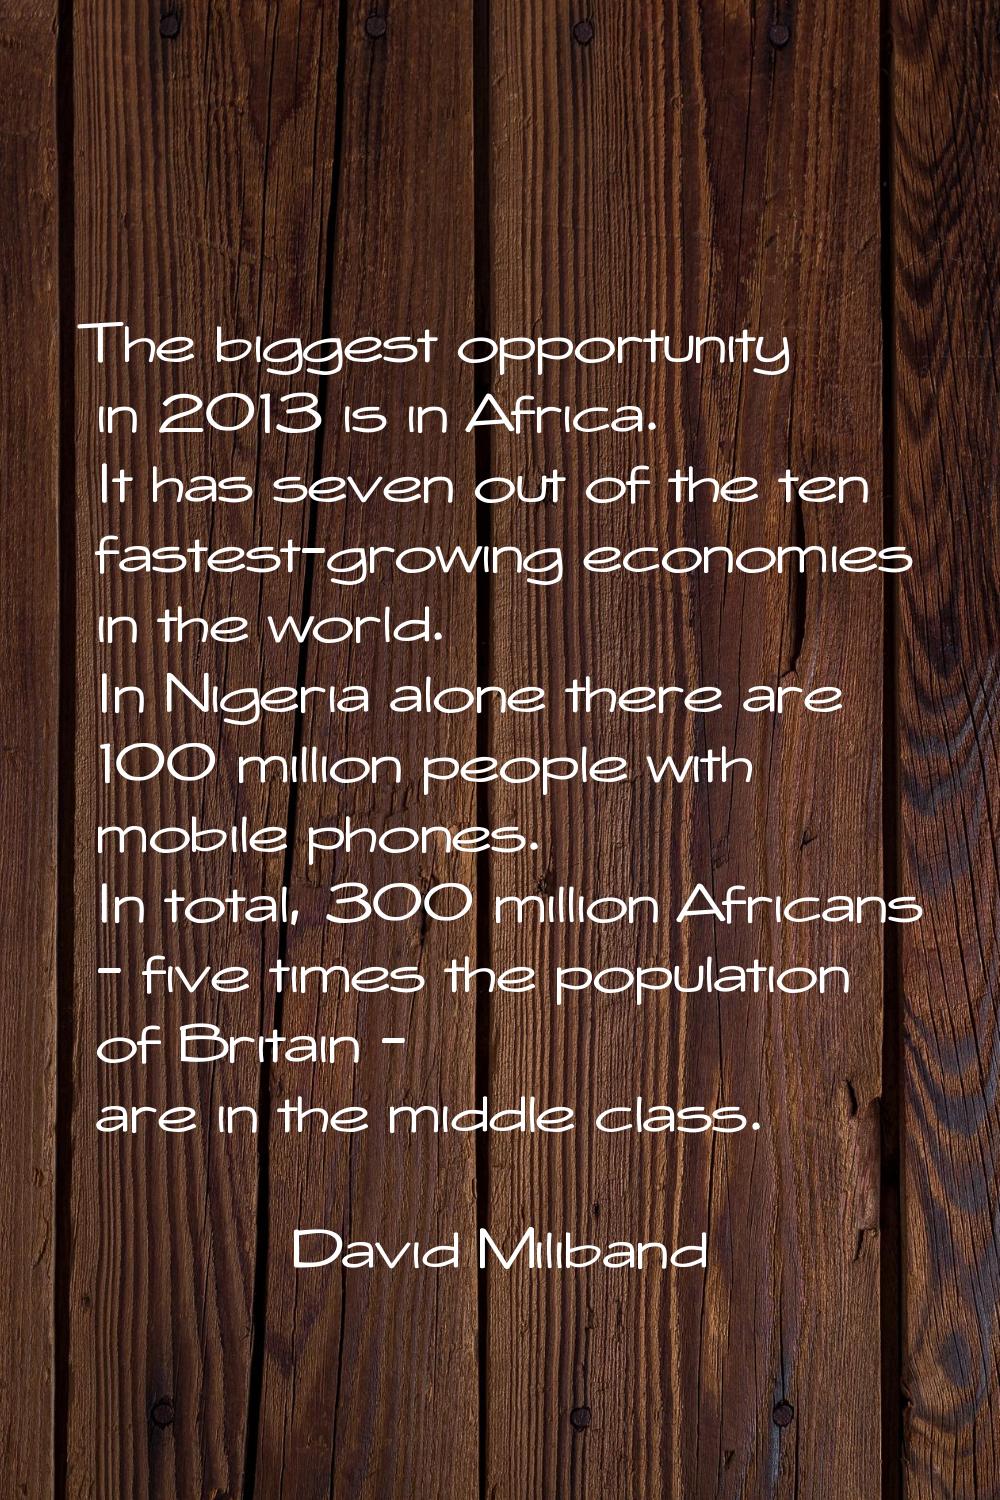 The biggest opportunity in 2013 is in Africa. It has seven out of the ten fastest-growing economies